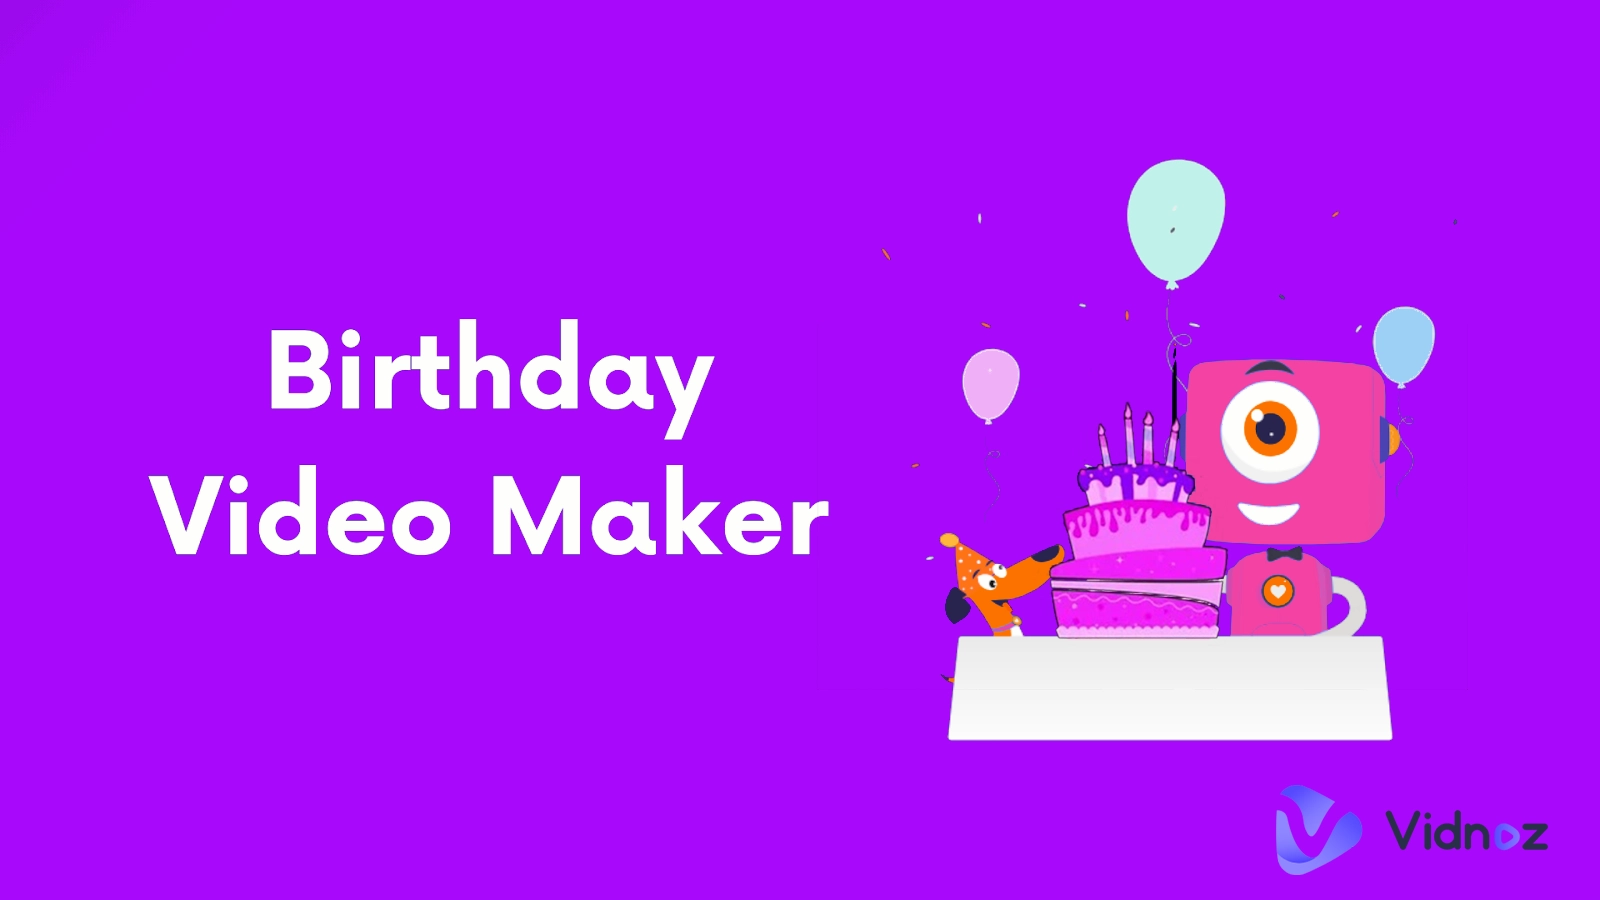 Birthday Video Maker - How to Create a Surprise Birthday Video Easy and Fast